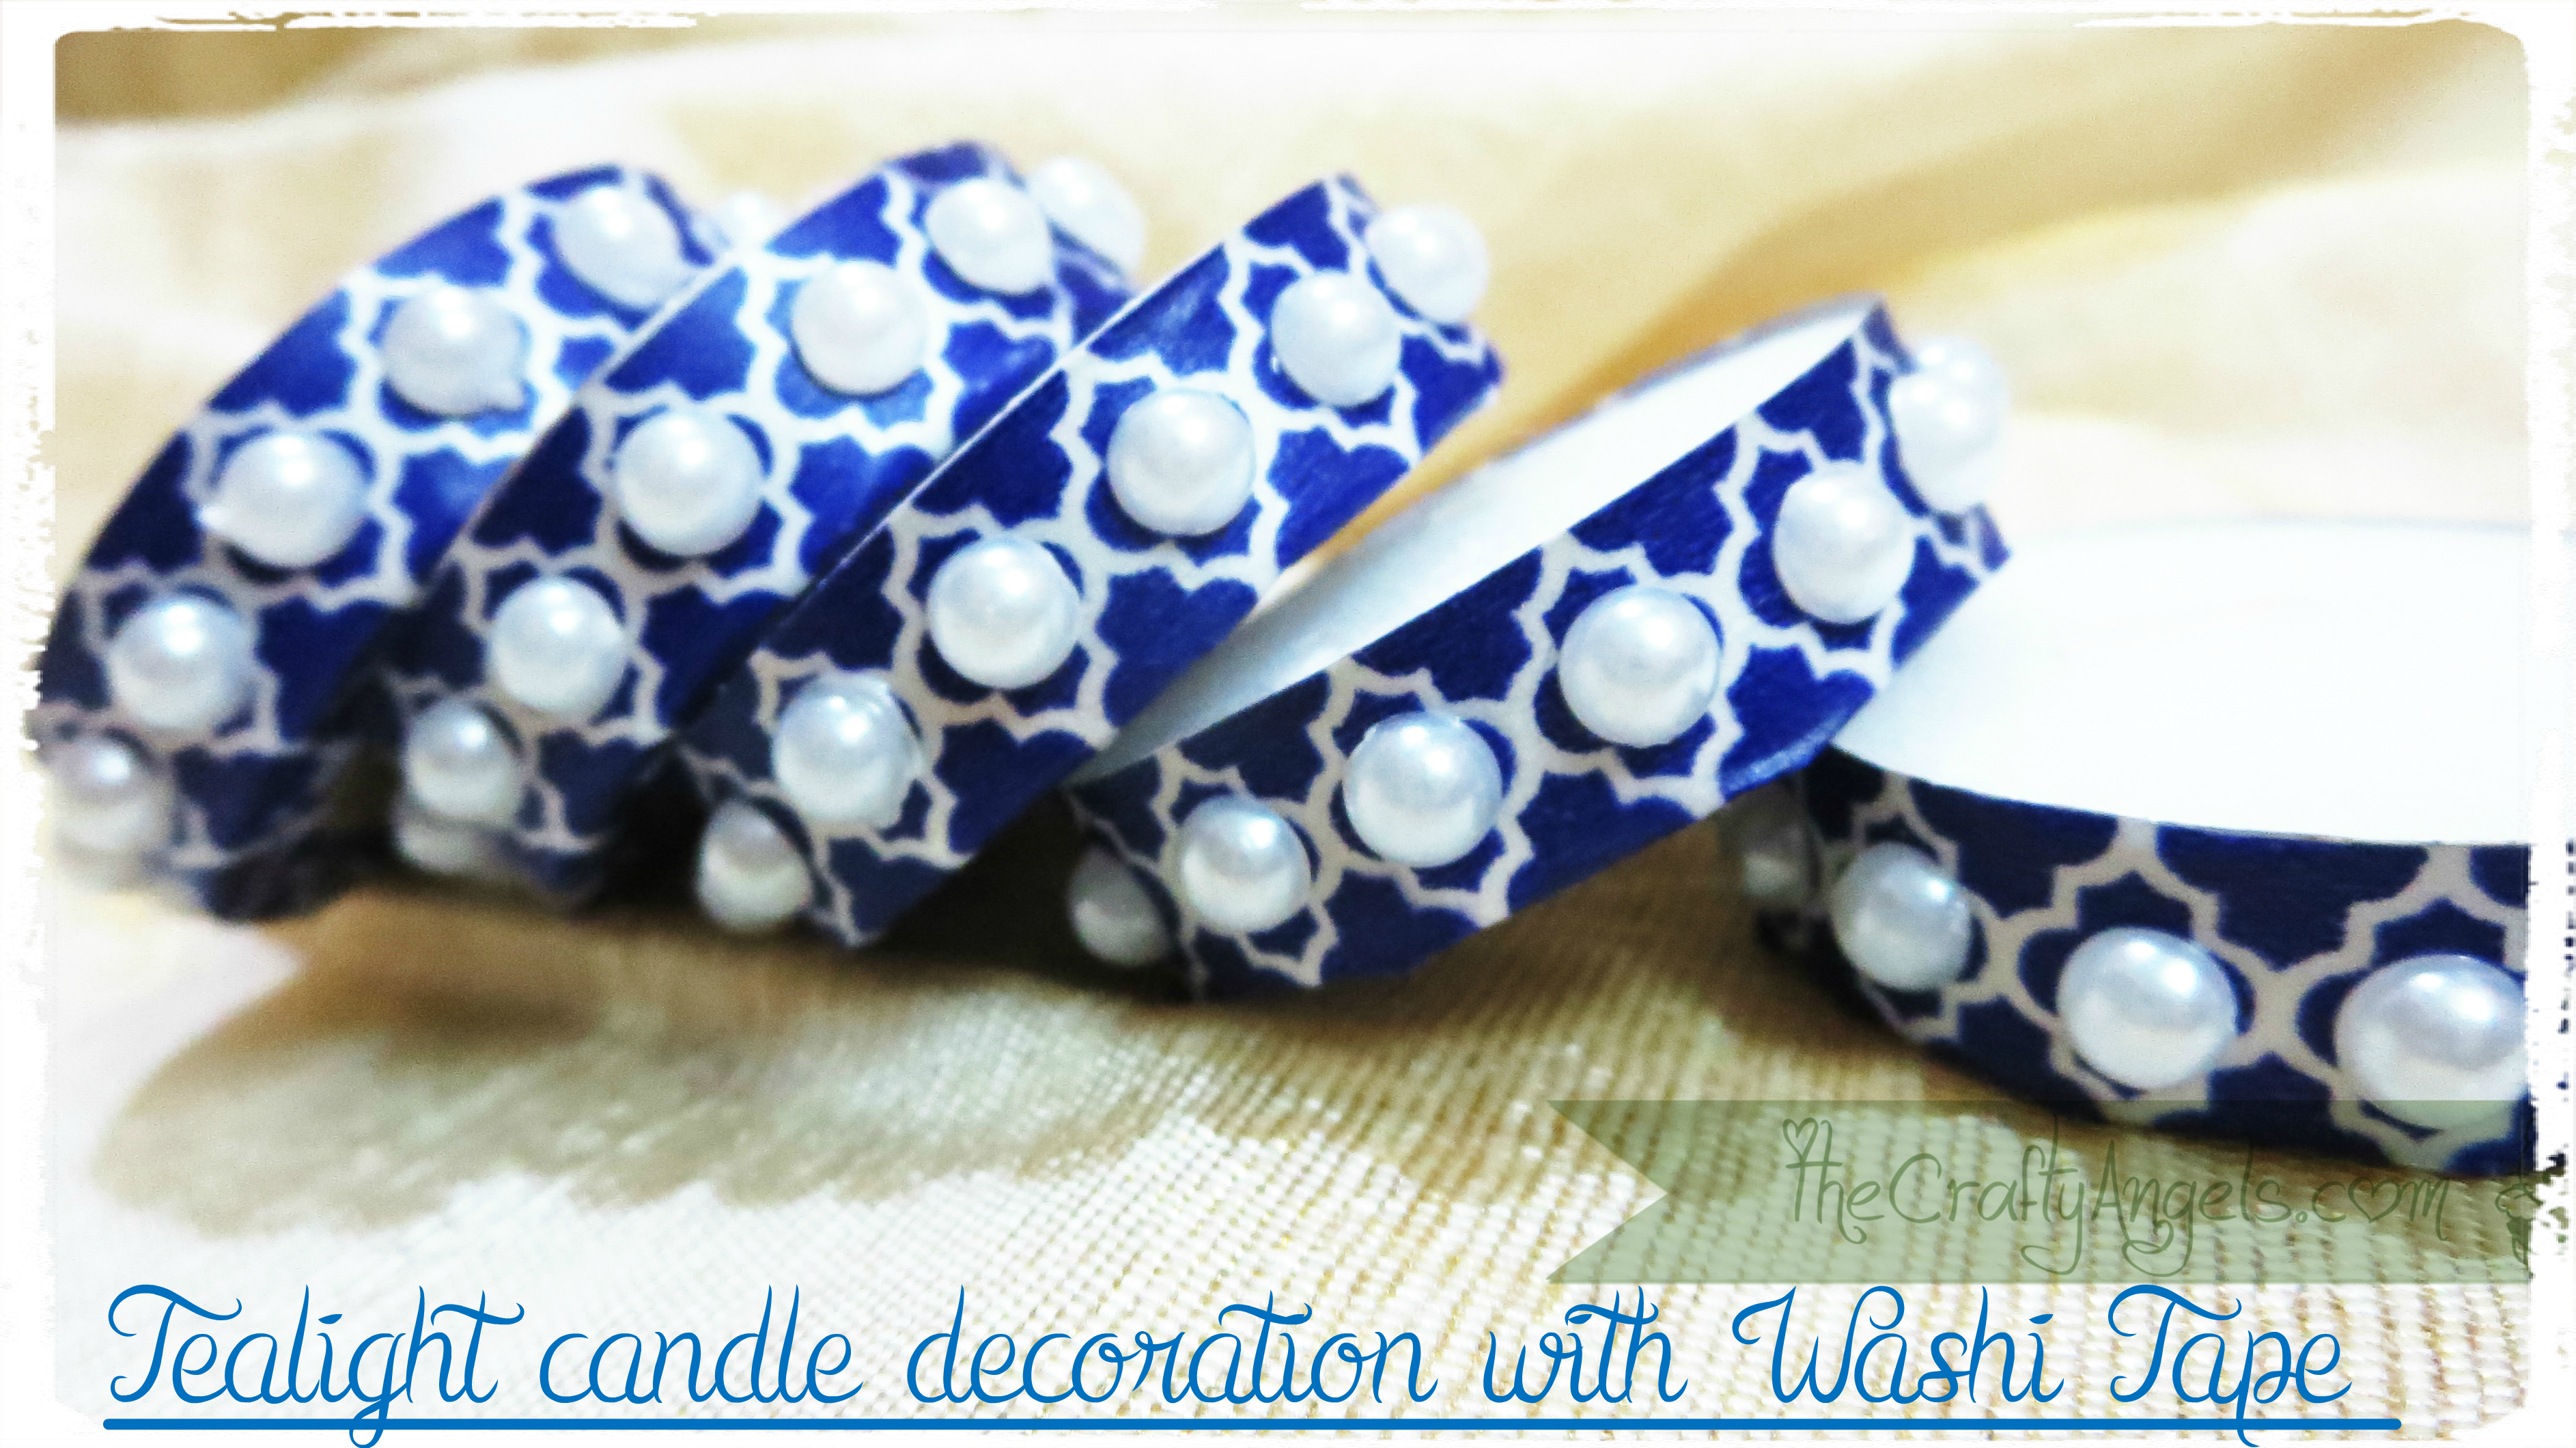 Tealight candle decoration with Washi tape